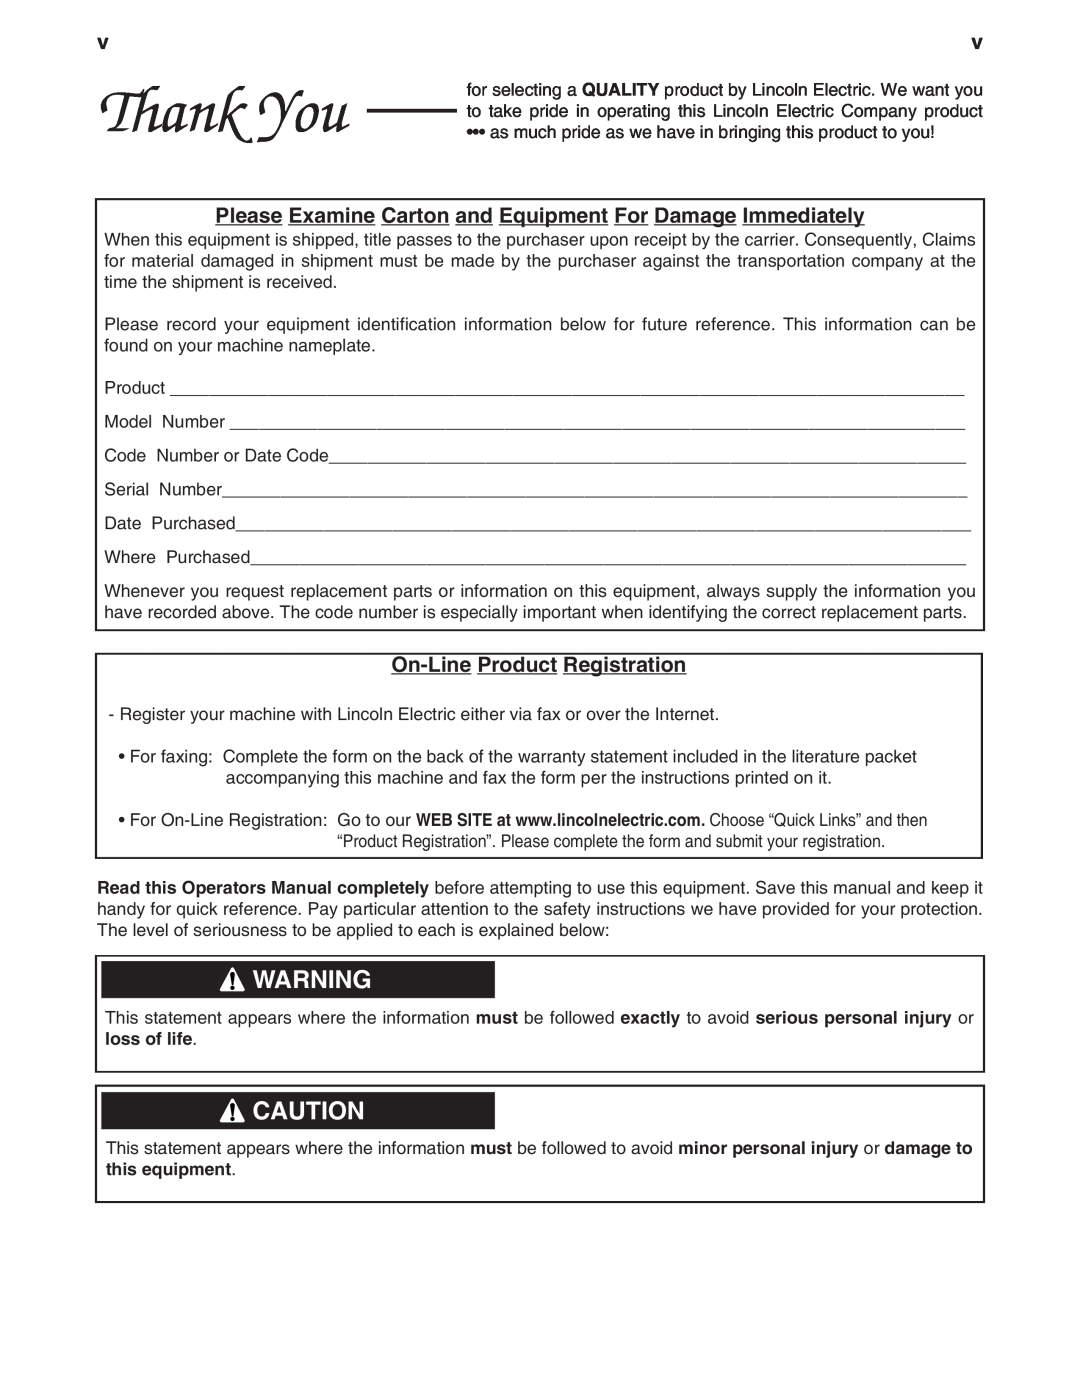 Lincoln Electric IM857 manual On-LineProduct Registration, Thank You 